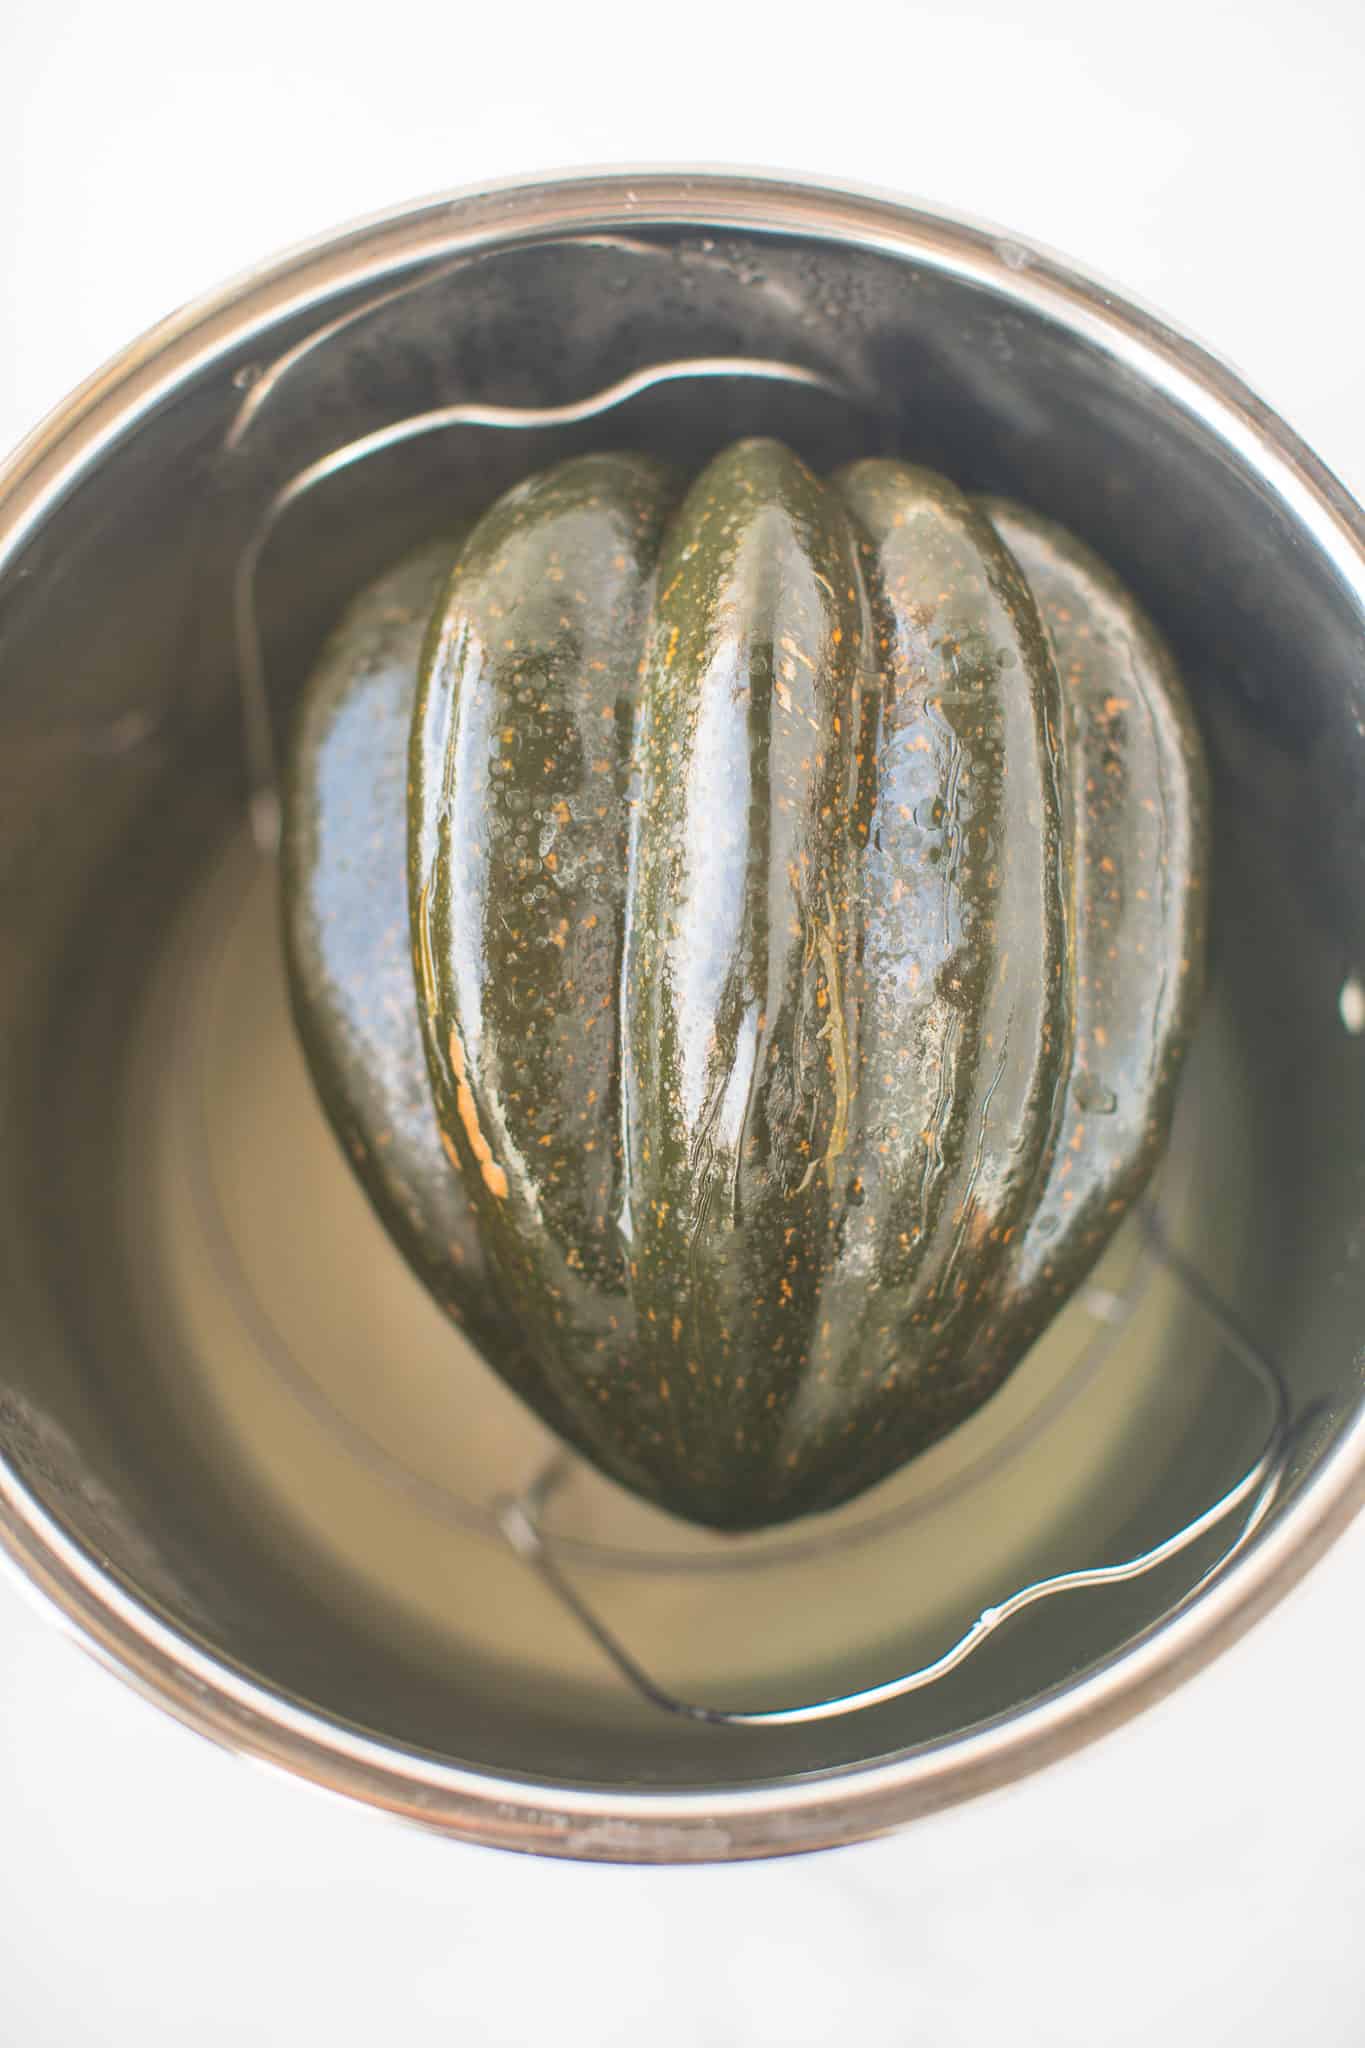 cooked whole acorn squash inside a pressure cooker